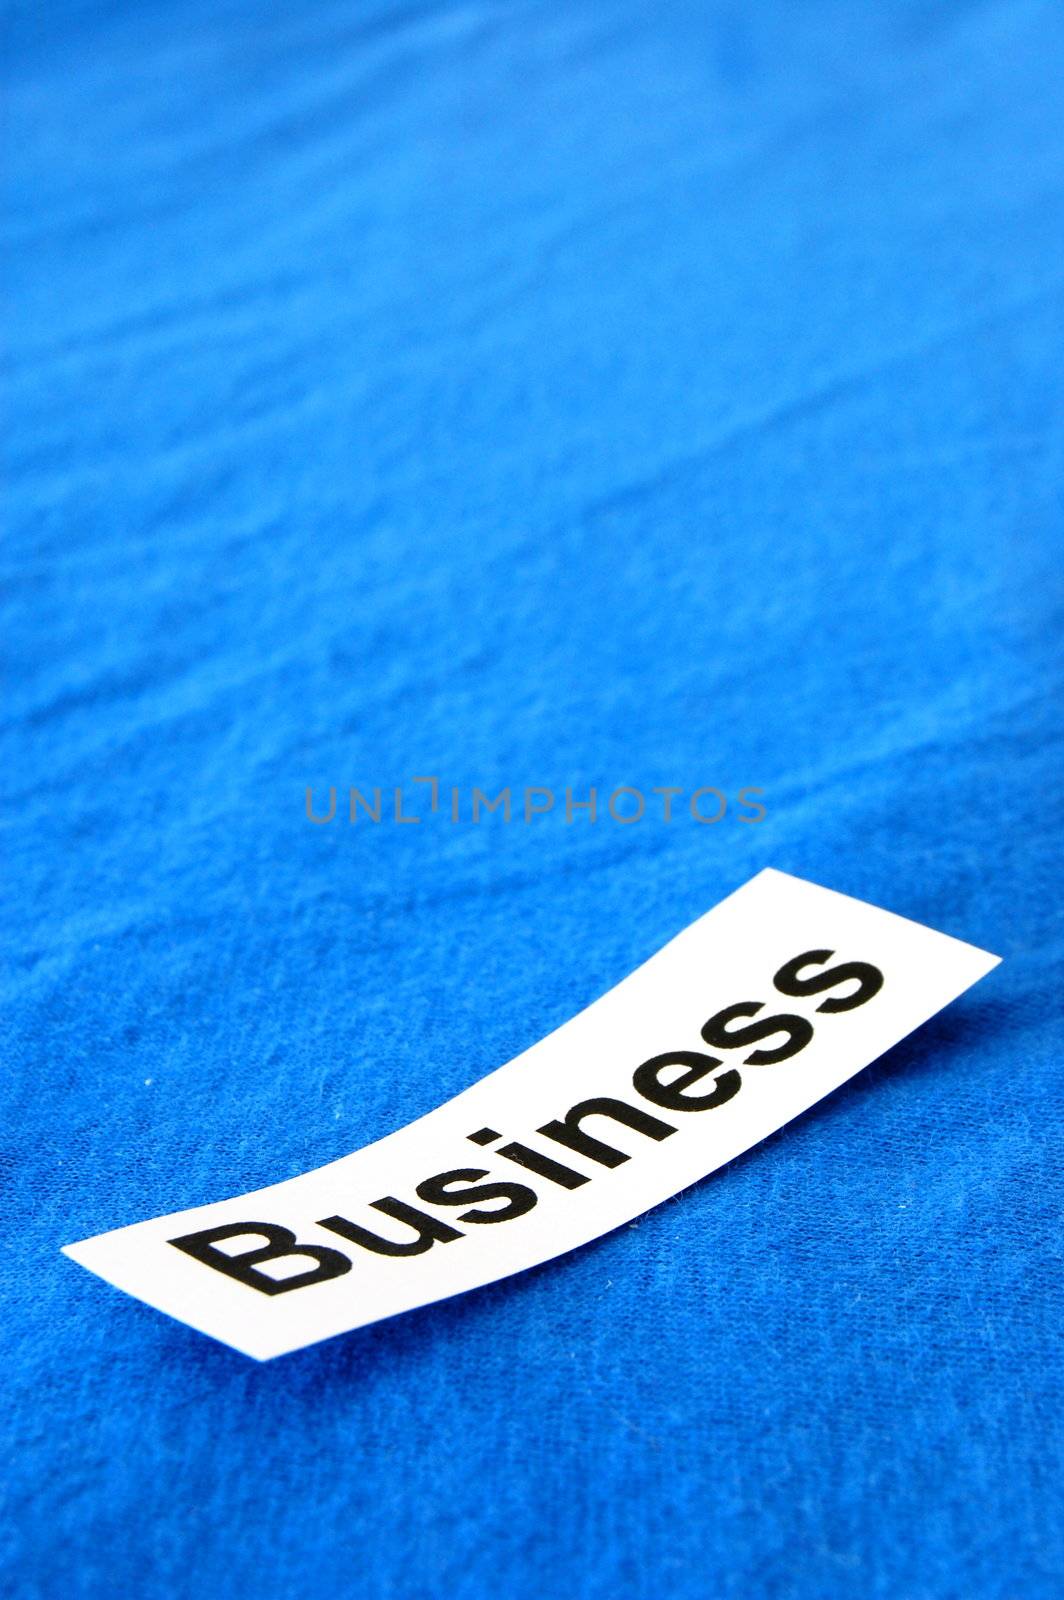 business written on paper showing commercial concept